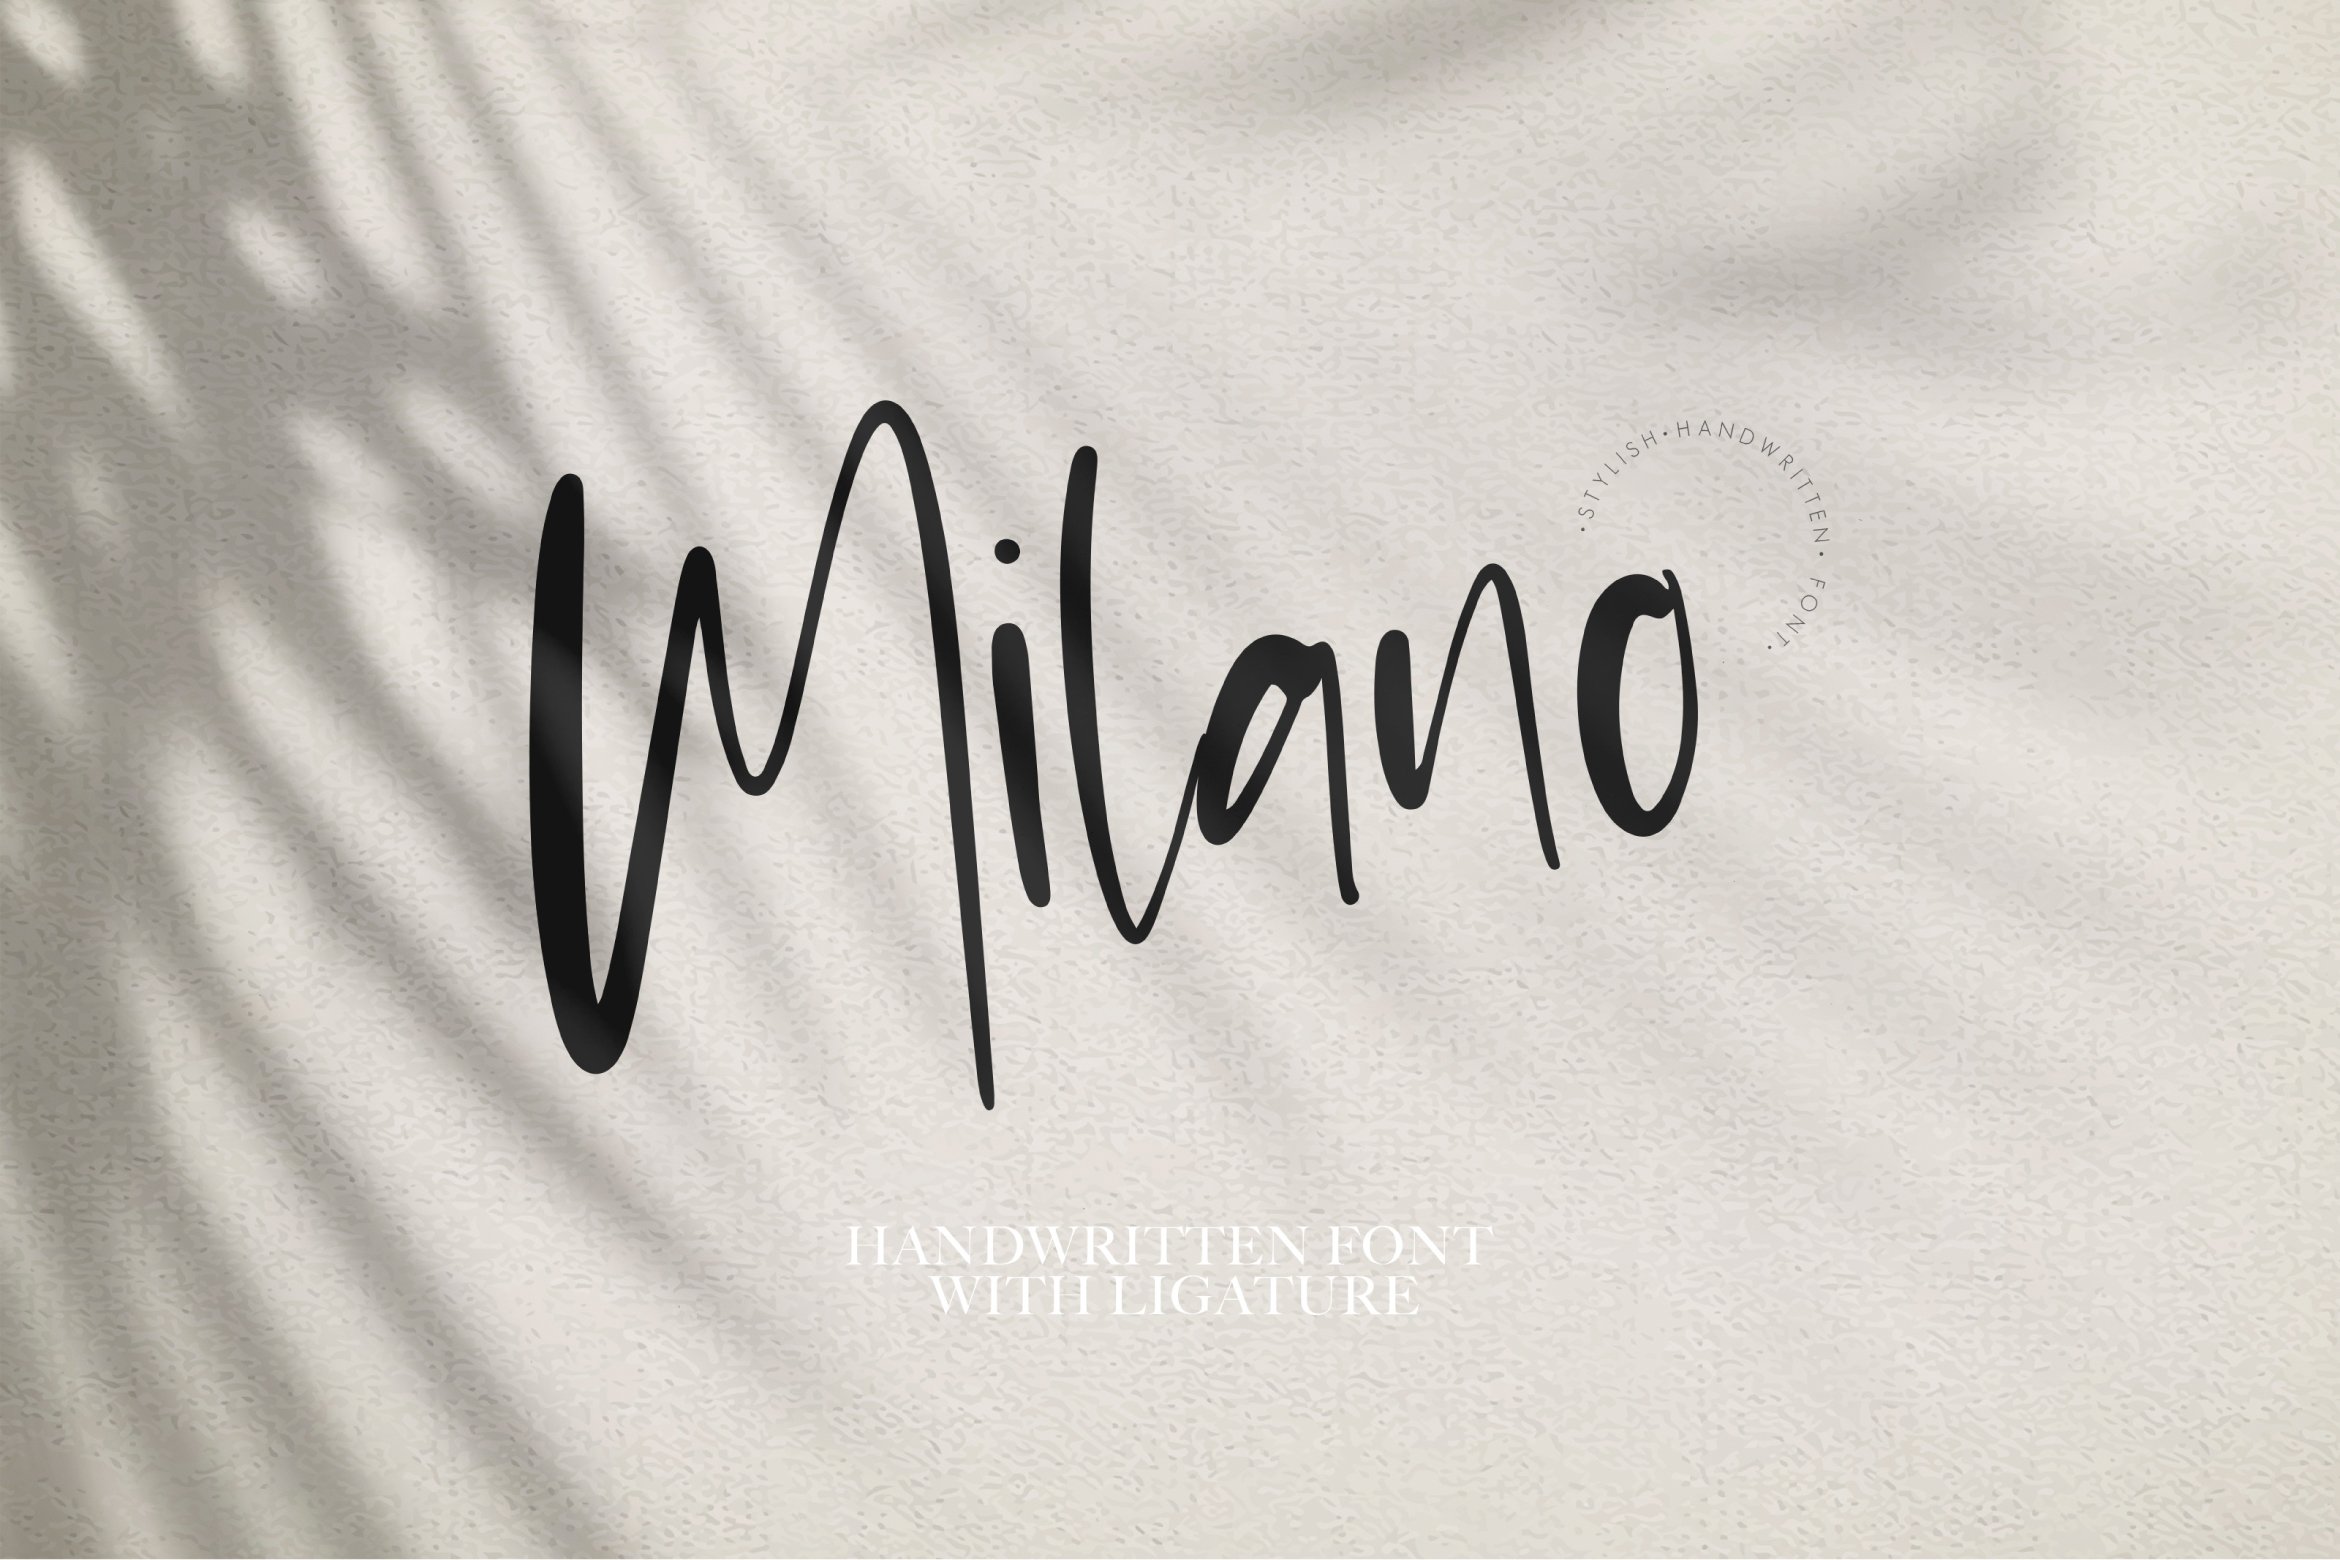 Milano | Stylist Font cover image.